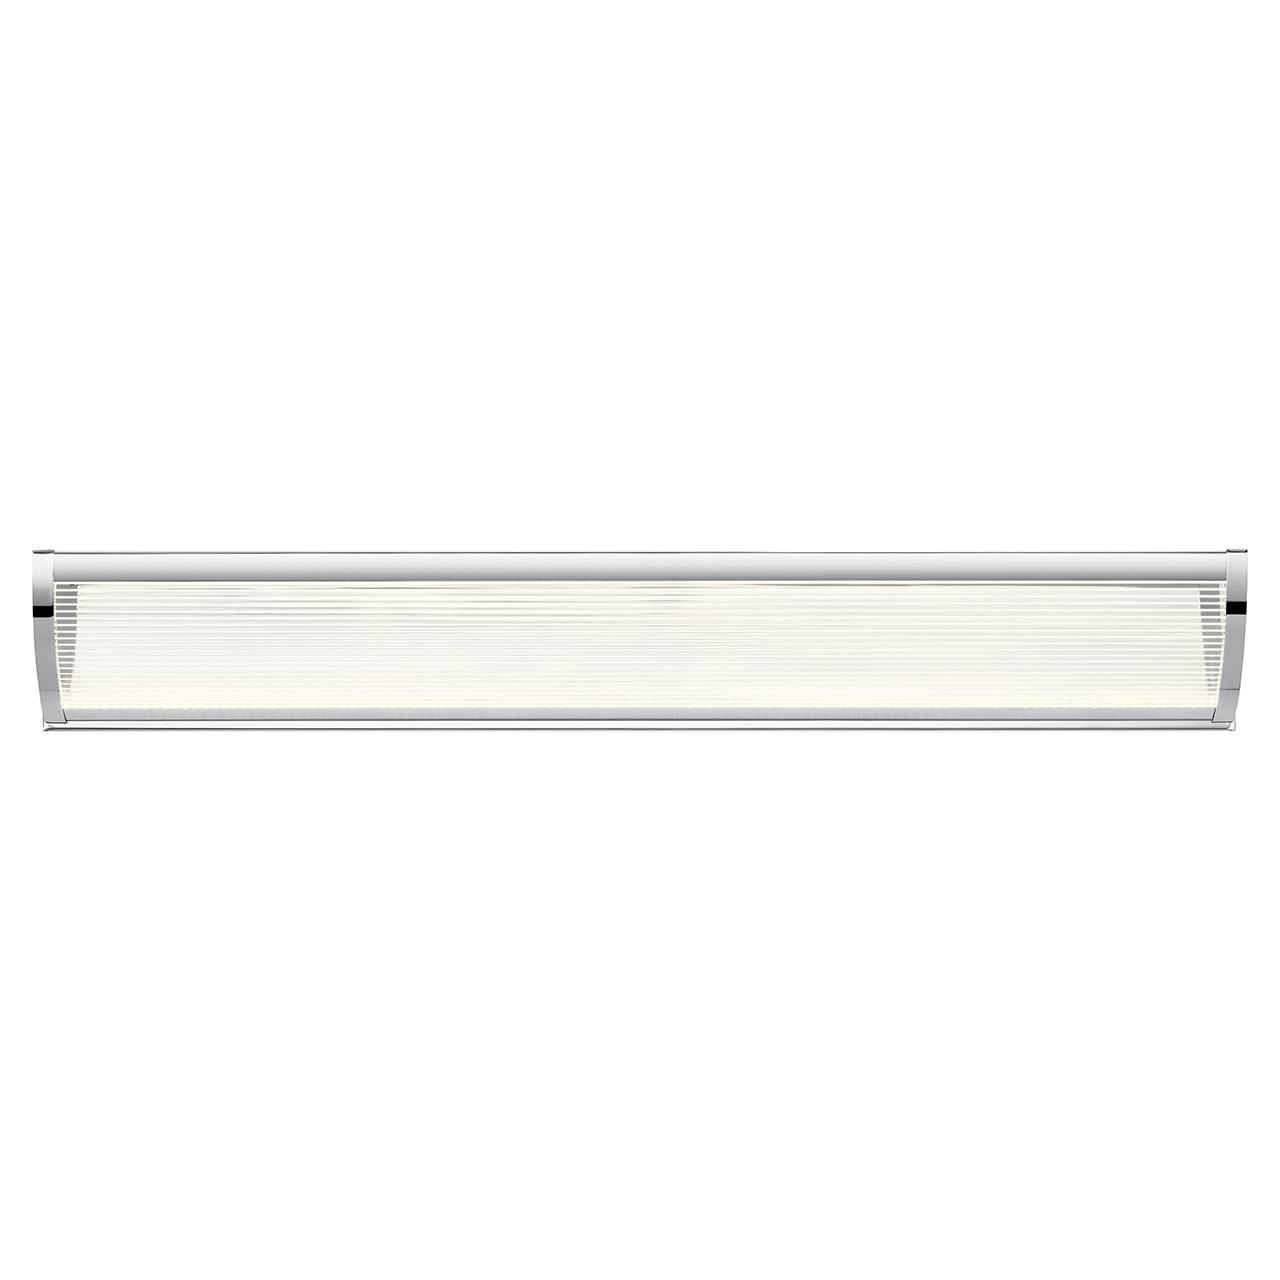 Front view of the Roone 3000K 34" Linear Bath Light Chrome on a white background